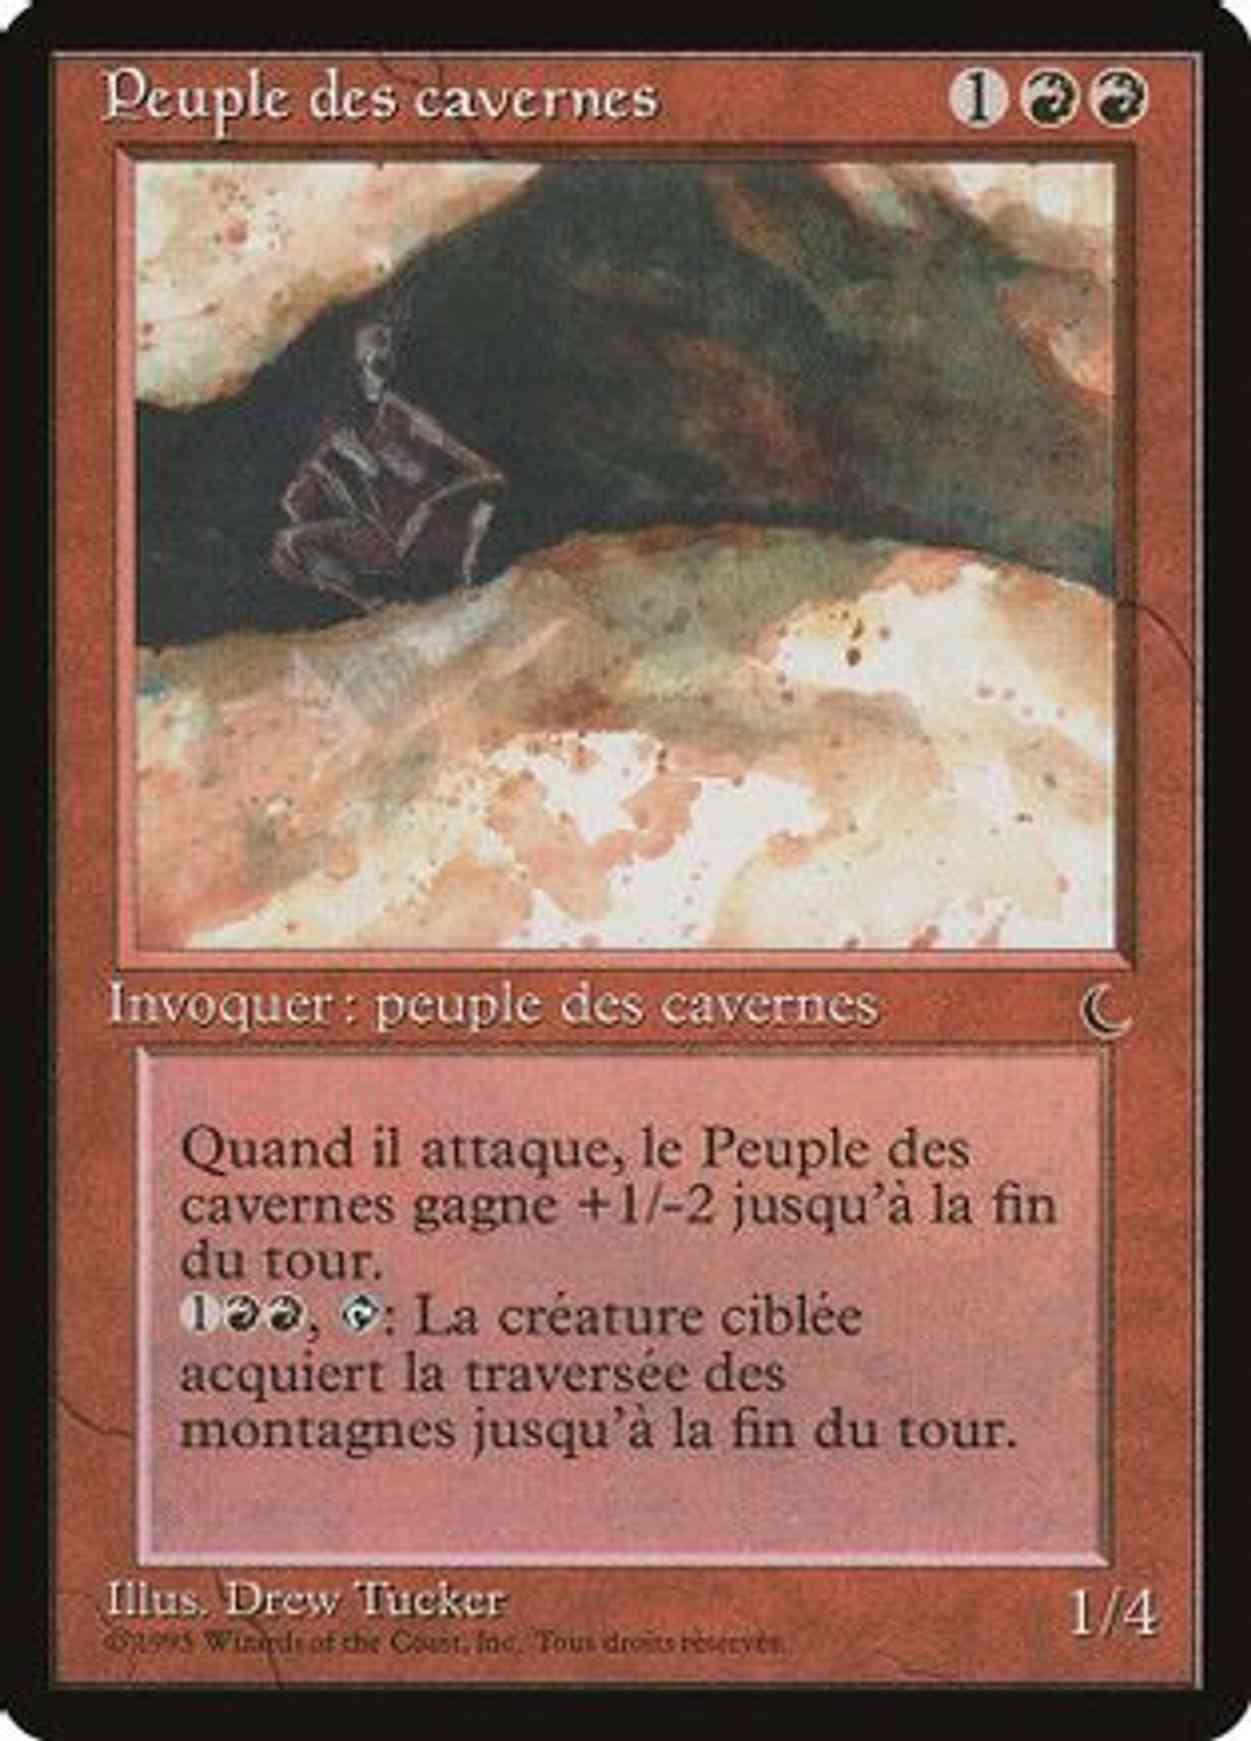 Cave People (French) - "Peuple des cavernes" magic card front